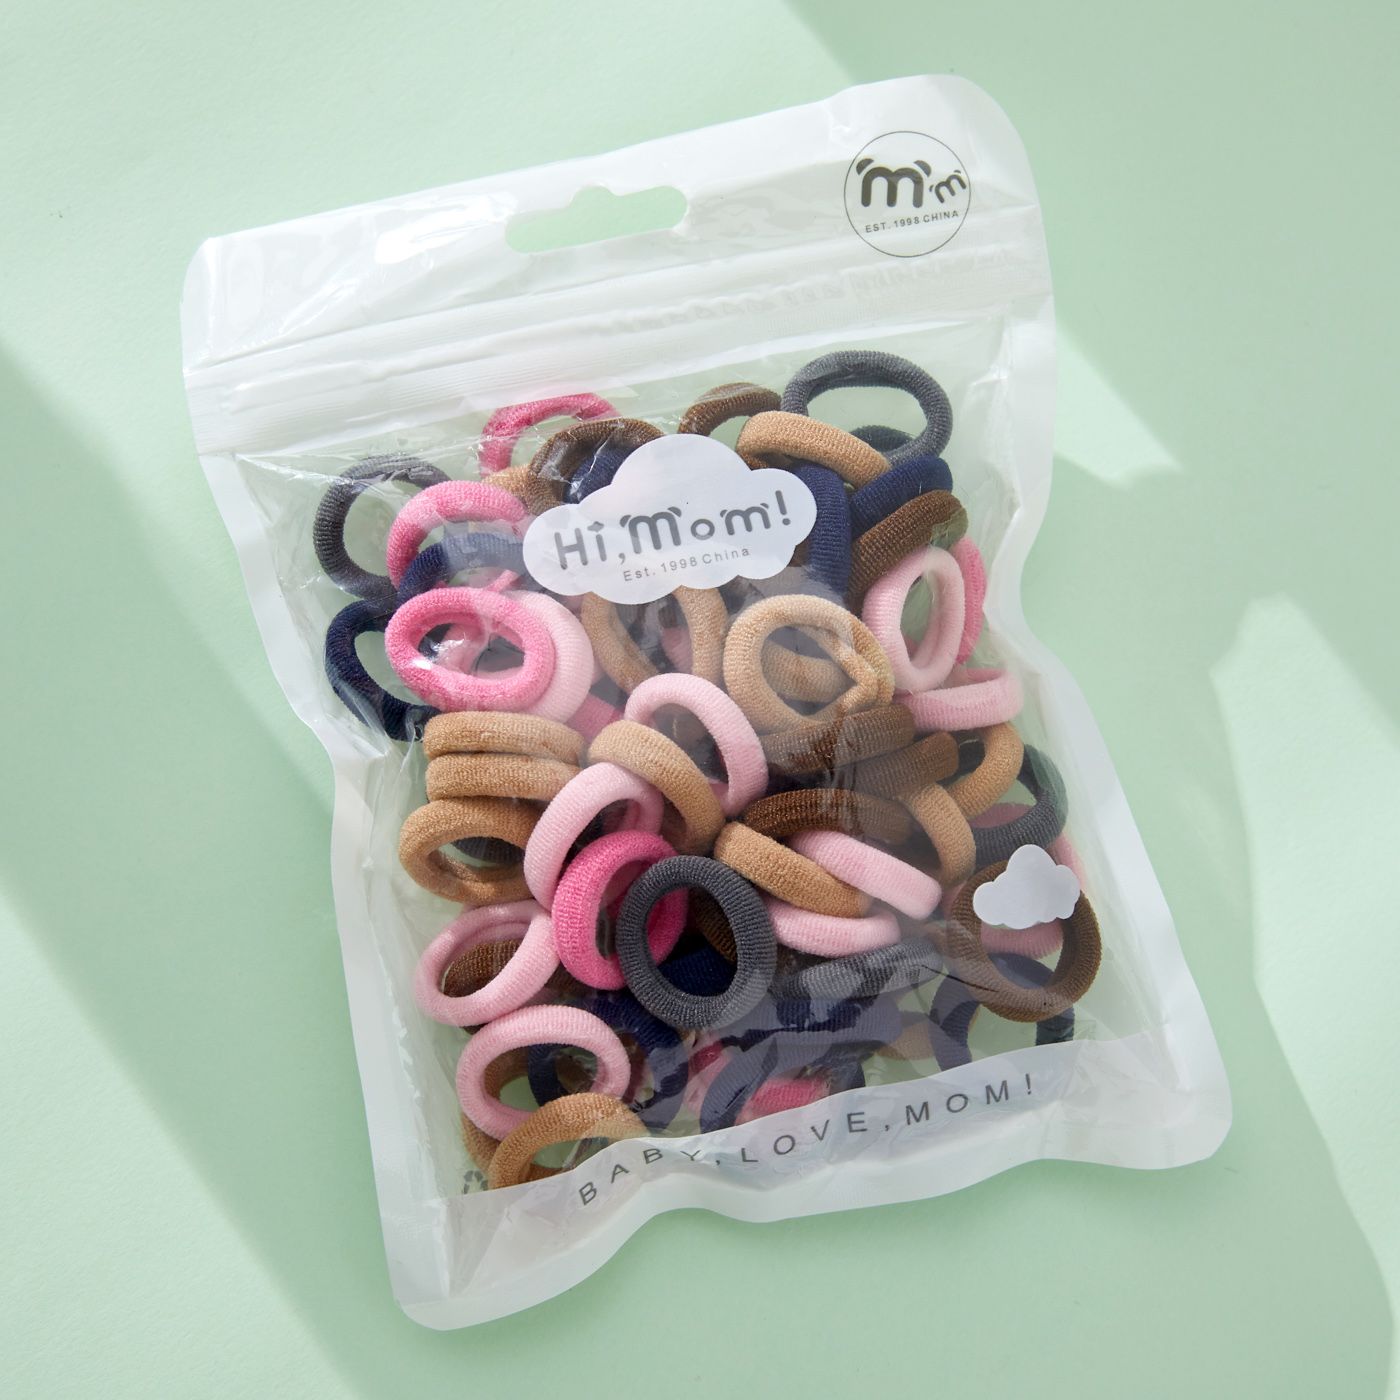 100-pack Pretty Hairbands For Girls